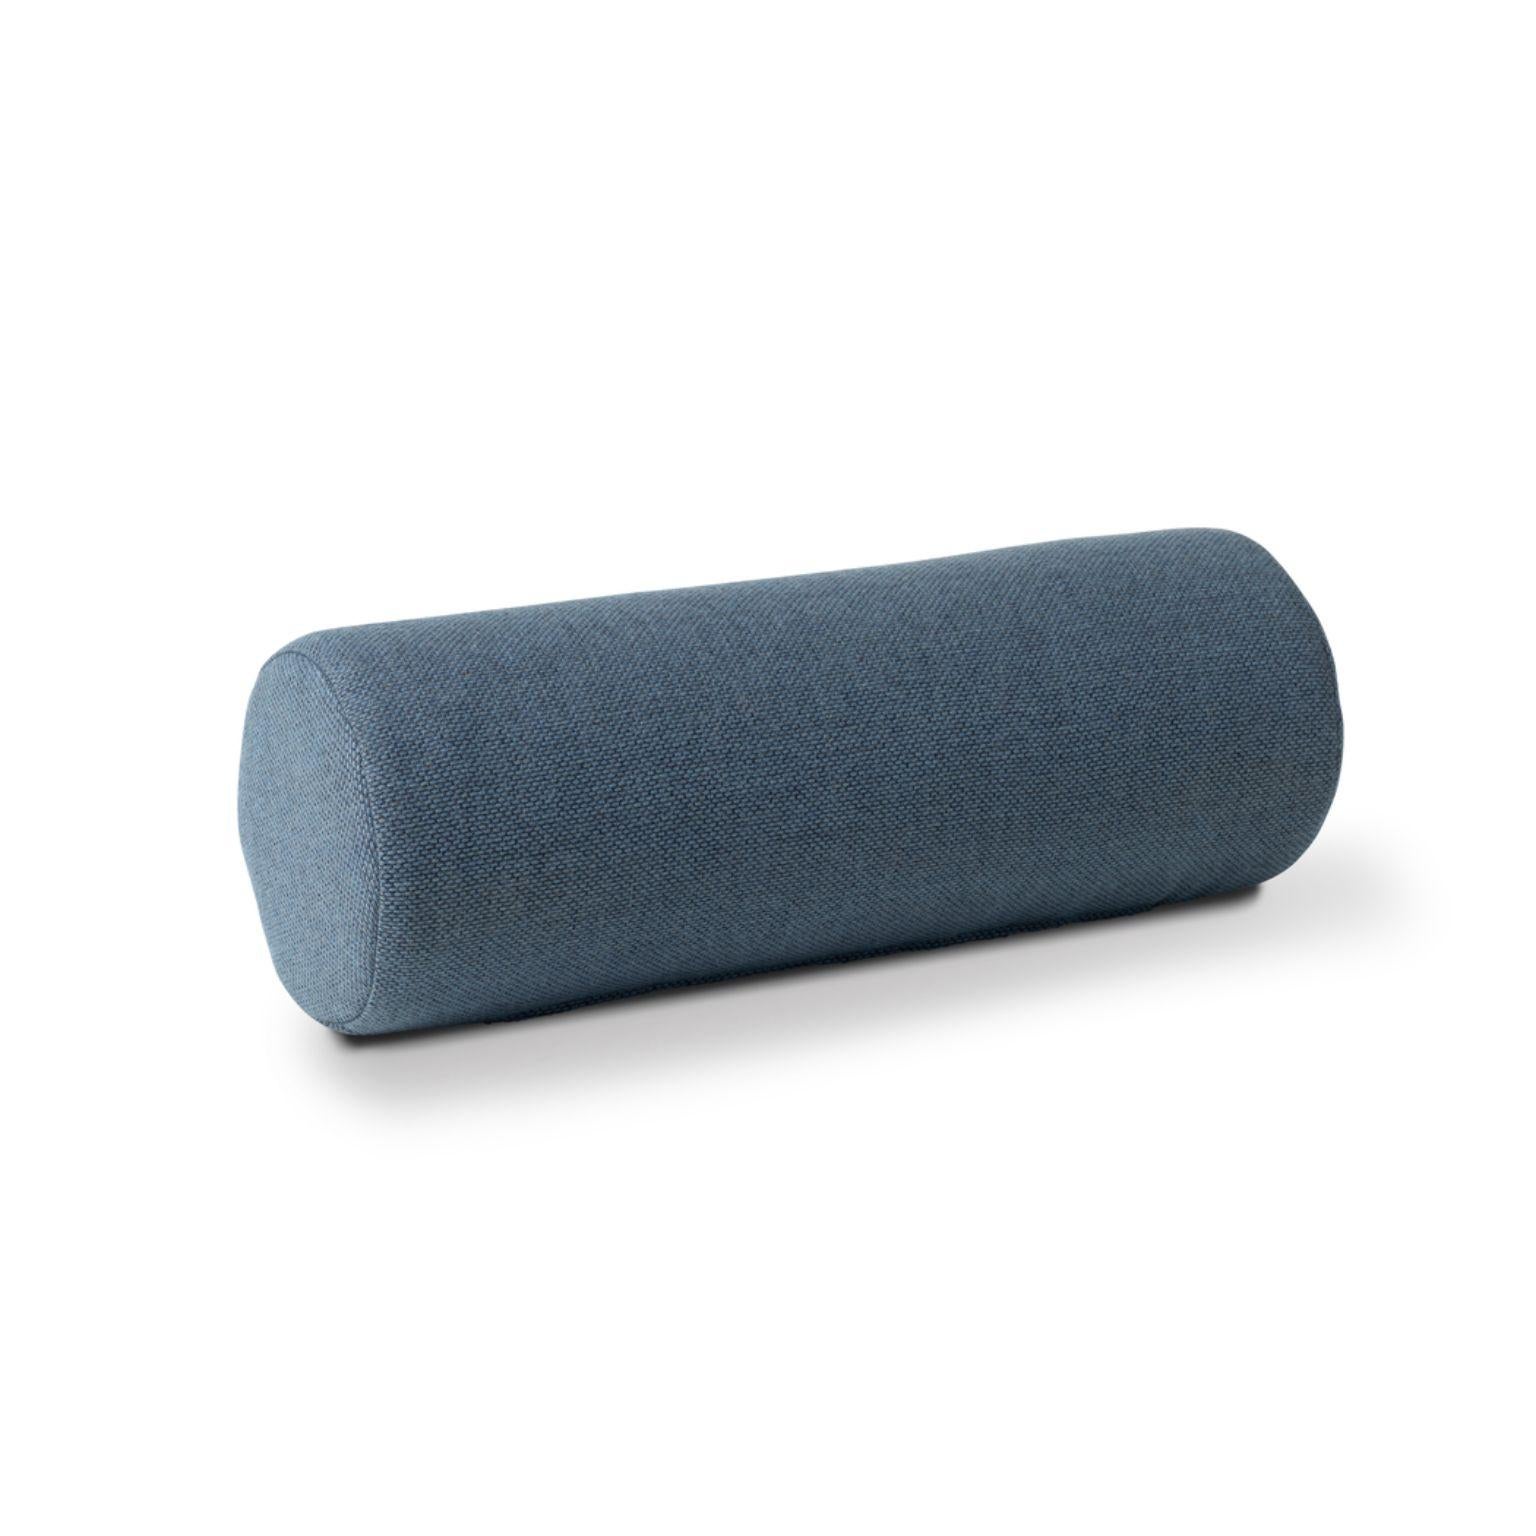 Galore cushion light steel blue by Warm Nordic
Dimensions: D 16 x H 46 cm
Material: Textile upholstery, Granulate and feathers filling.
Weight: 0.9 kg
Also available in different colors and finishes. 

An elegant bolster cushion, which matches